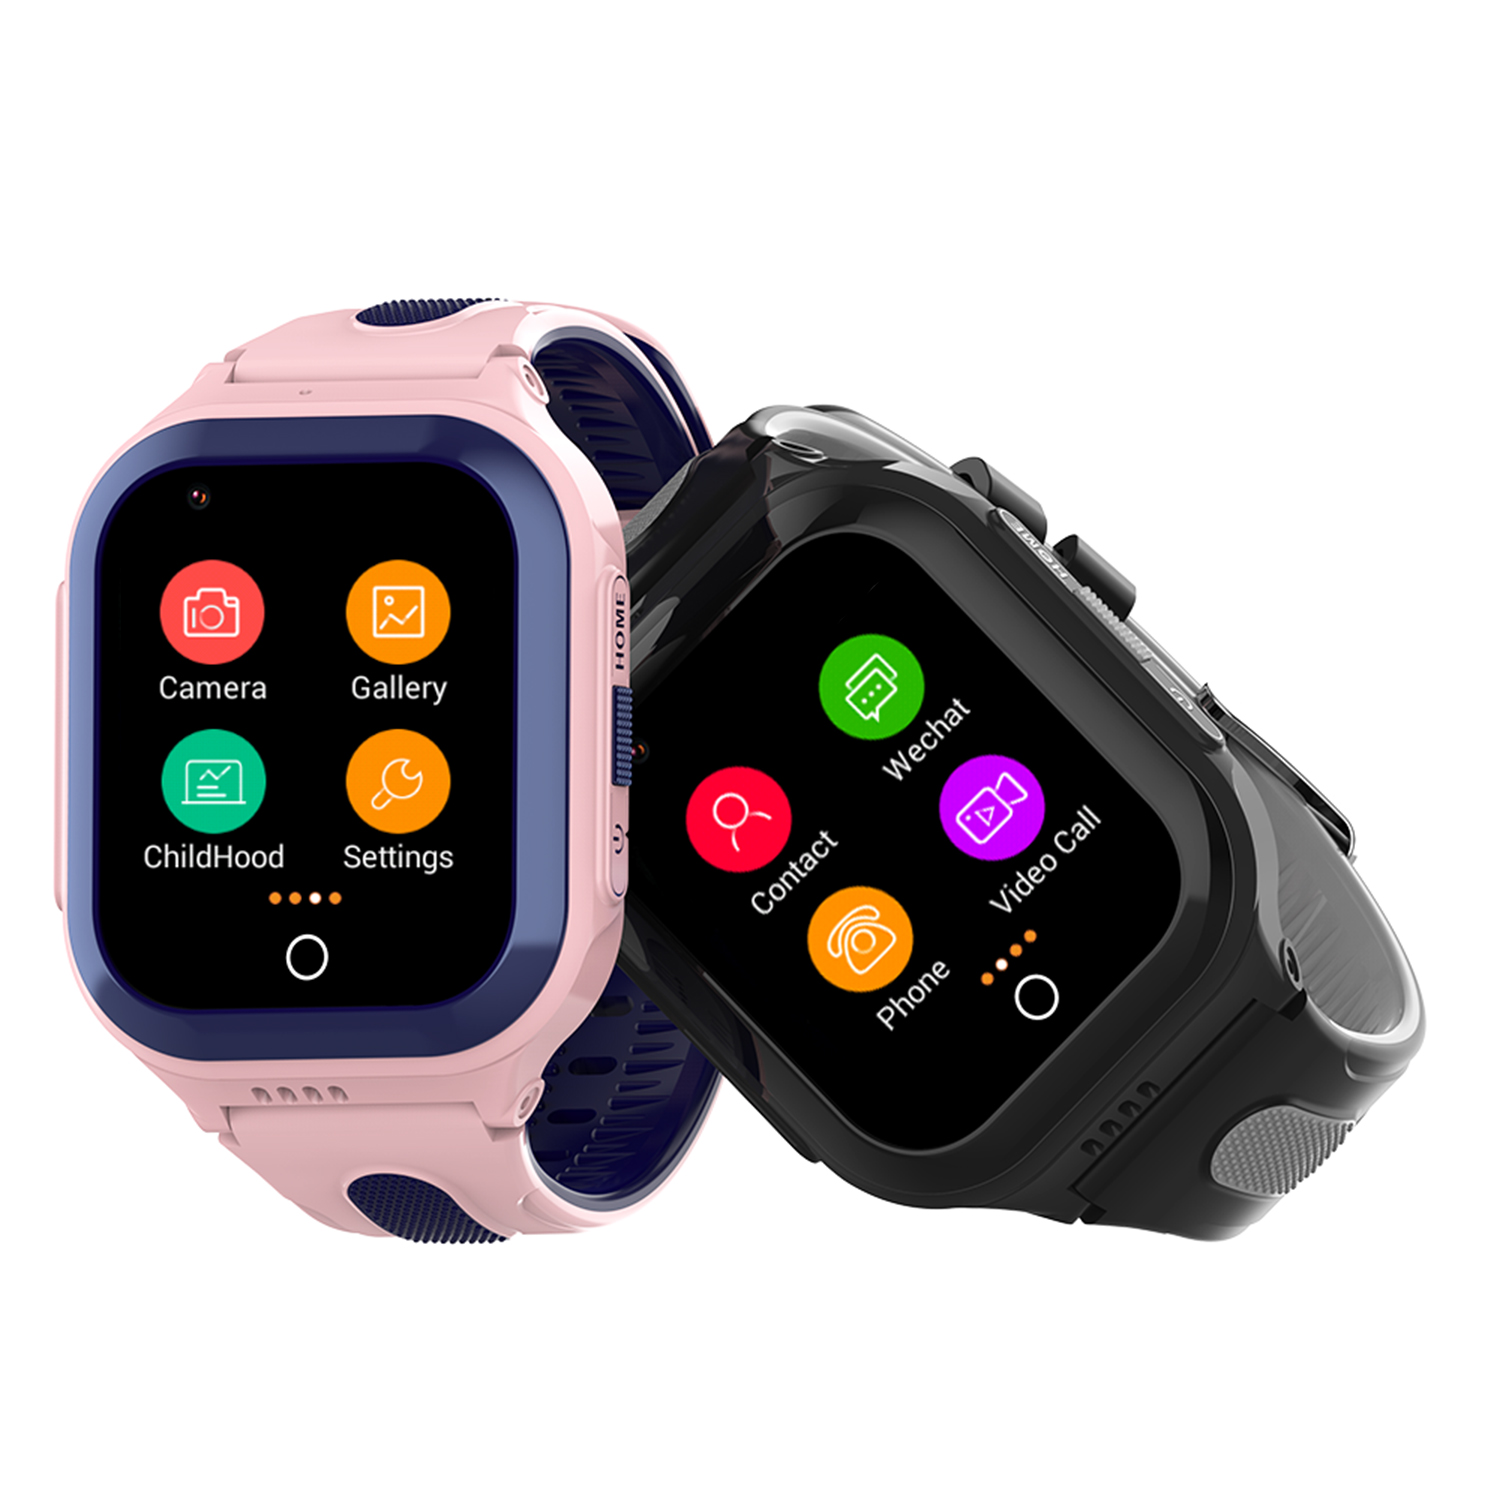 China Factory Supply 4G IP67 waterproof accurate Child GPS Security Watch with Free APP Beesure GPS alarm alerts for Kids Safety Monitor Y45